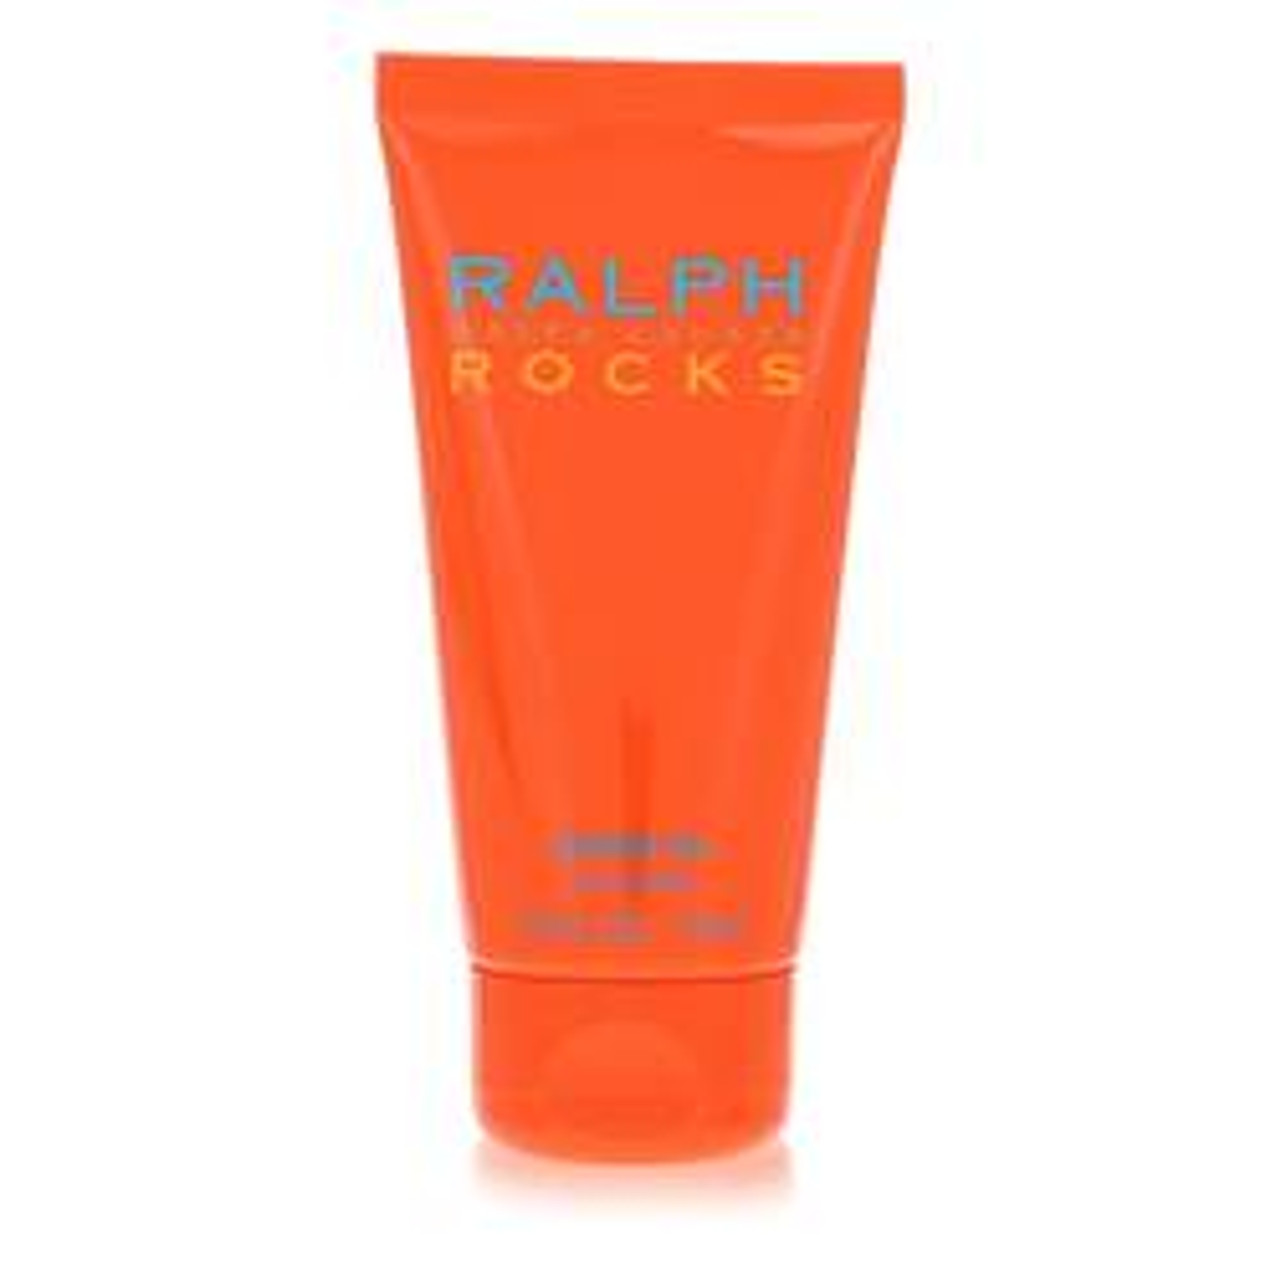 Ralph Rocks Perfume By Ralph Lauren Shower Gel 2.5 oz for Women - [From 11.00 - Choose pk Qty ] - *Ships from Miami